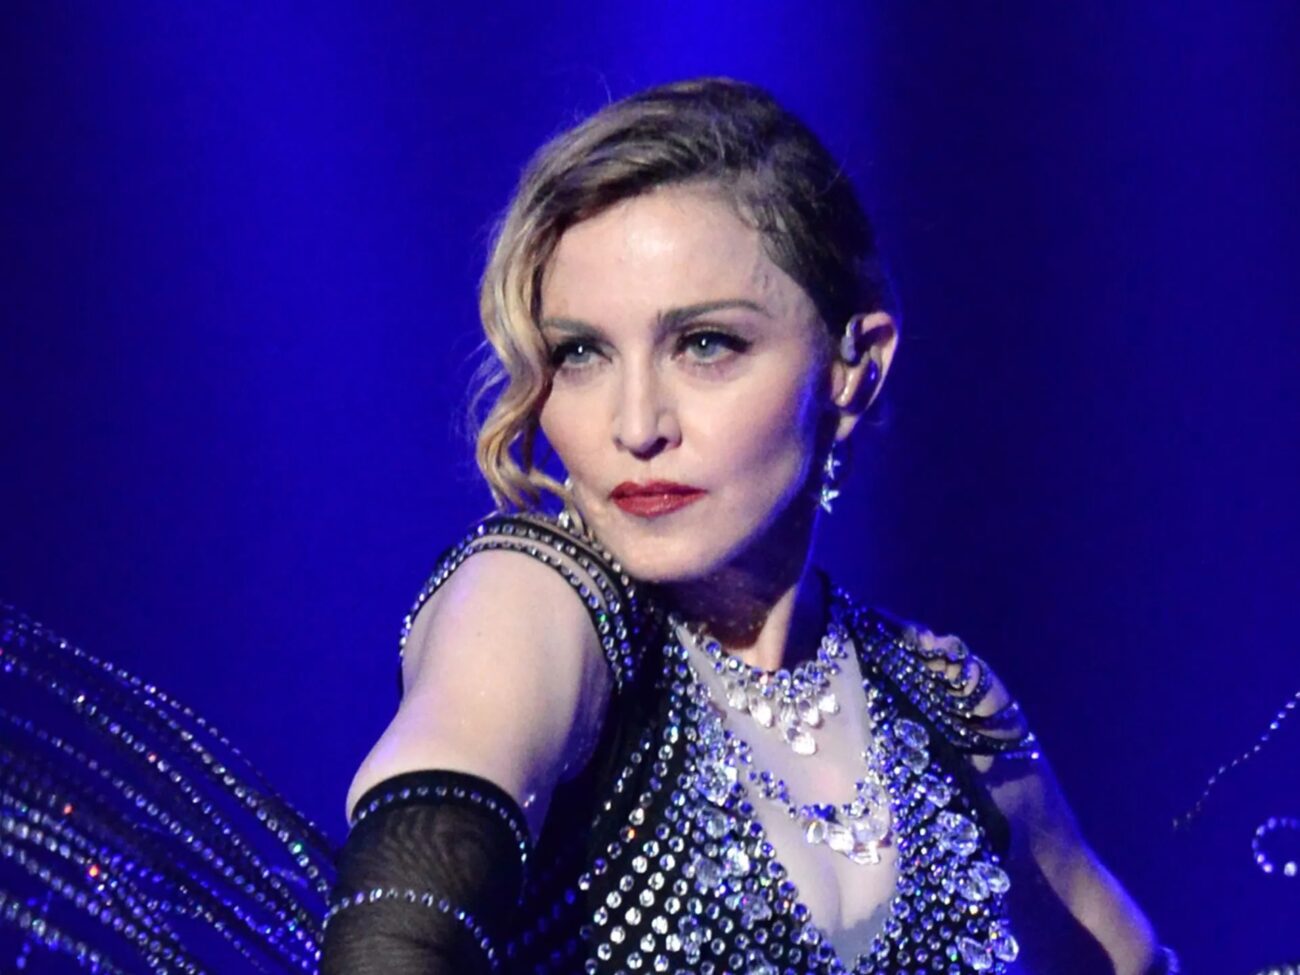 Fans have seen Madonna’s recent health scare caused many to think “Is Madonna dead?” Let’s take a look at the recent rumors.